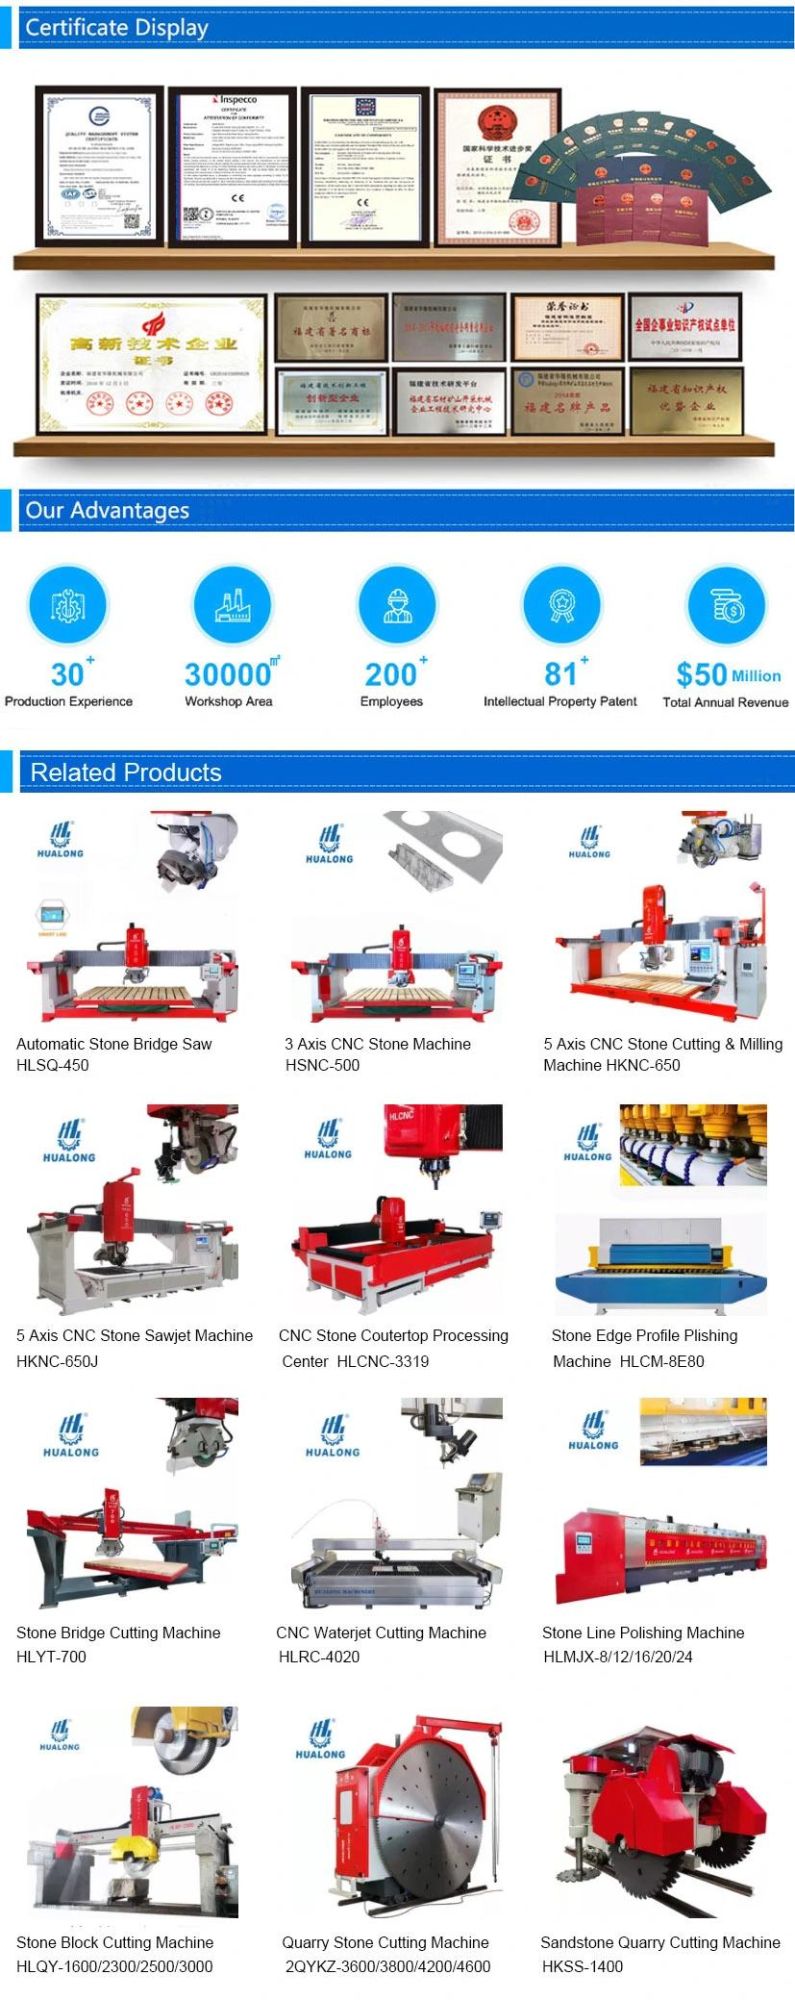 Monthly Deals Italian CNC Stone Countertop Cutting Machine 5 Axis Bridge Saw for Granite Marble Stone Processing with vacuum Lifter and Photoing